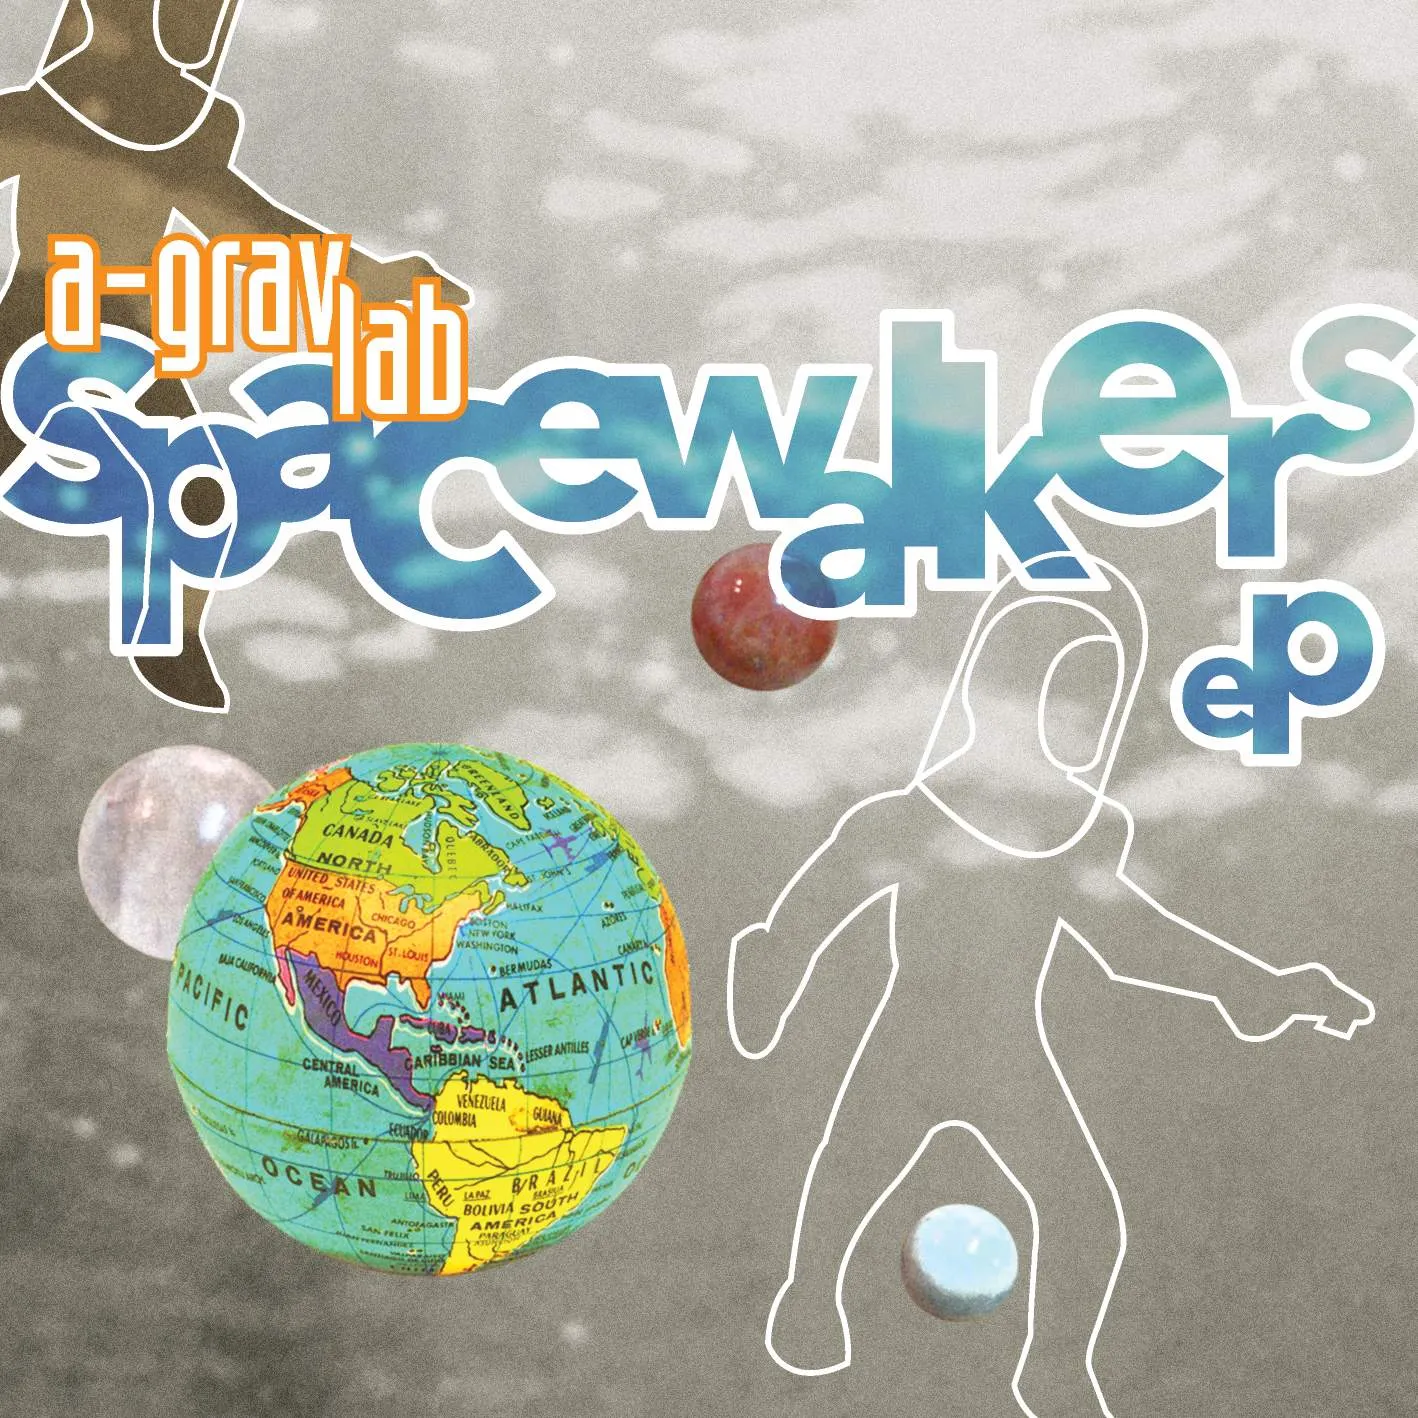 Album cover for “Spacewalkers EP” by A-Grav Lab